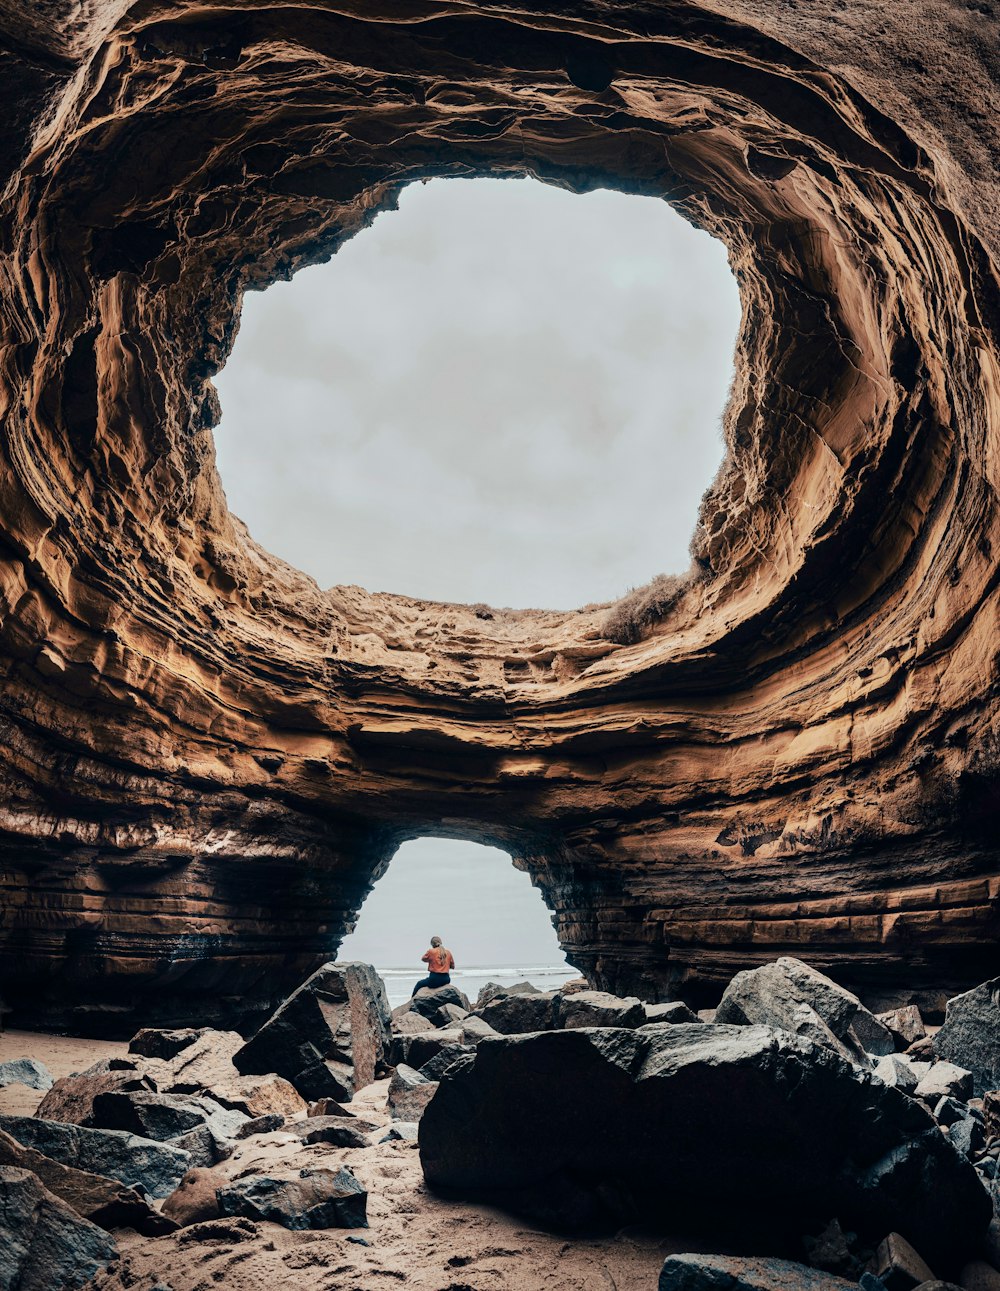 a person sitting in a cave on a rocky beach